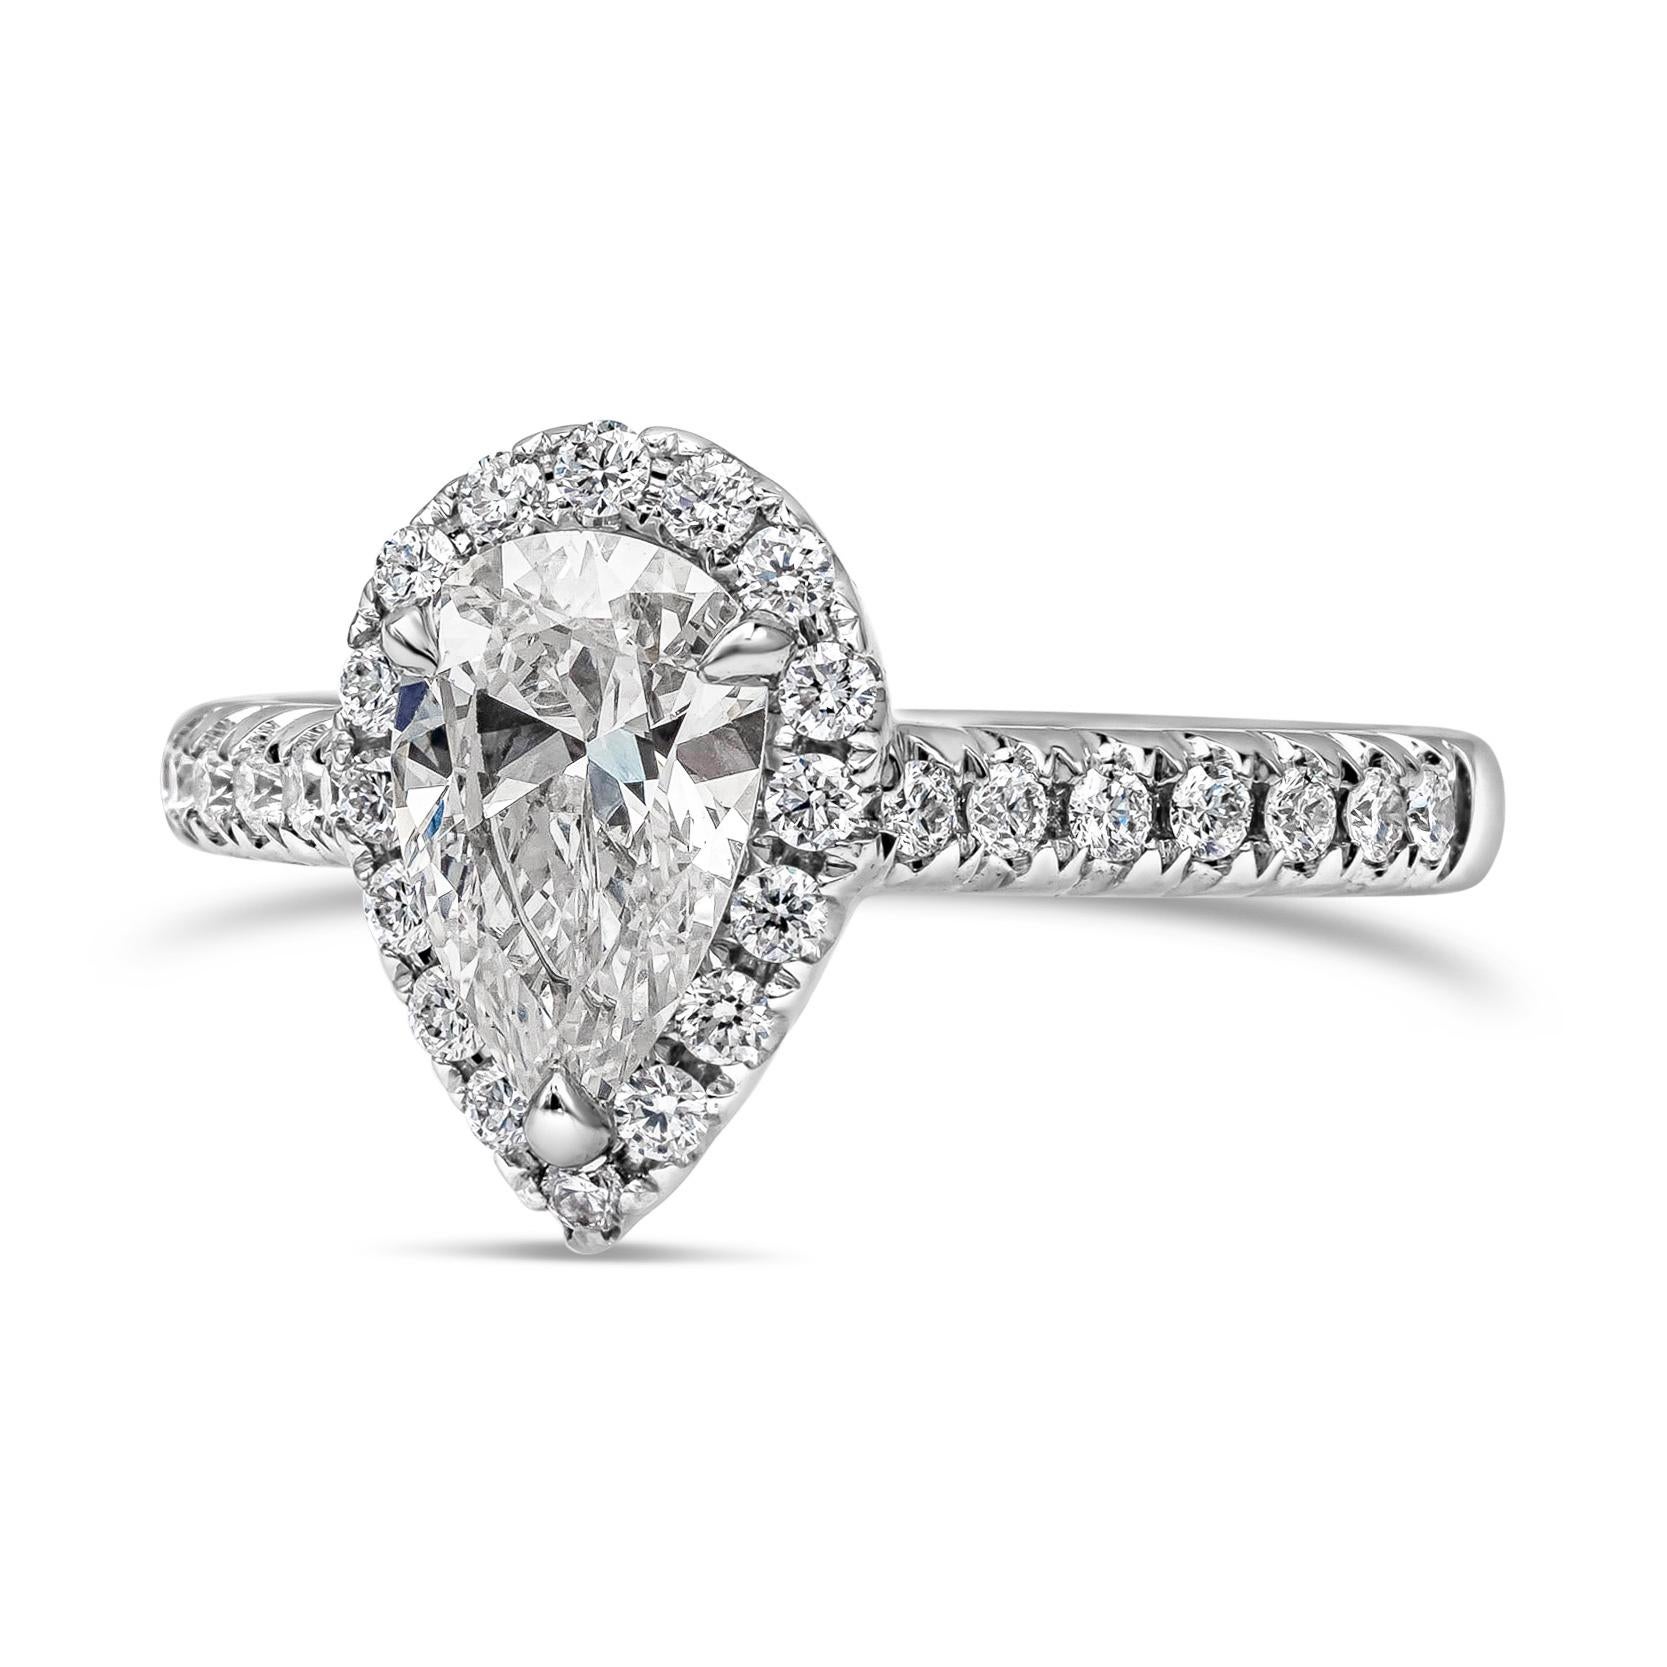 A classic engagement ring style showcasing a 1.04 carats pear shape diamond, certified by GIA as E color and VS2 in clarity. The center diamond is surrounded by a row of round brilliant diamonds halo setting, set in a diamond encrusted 18K white